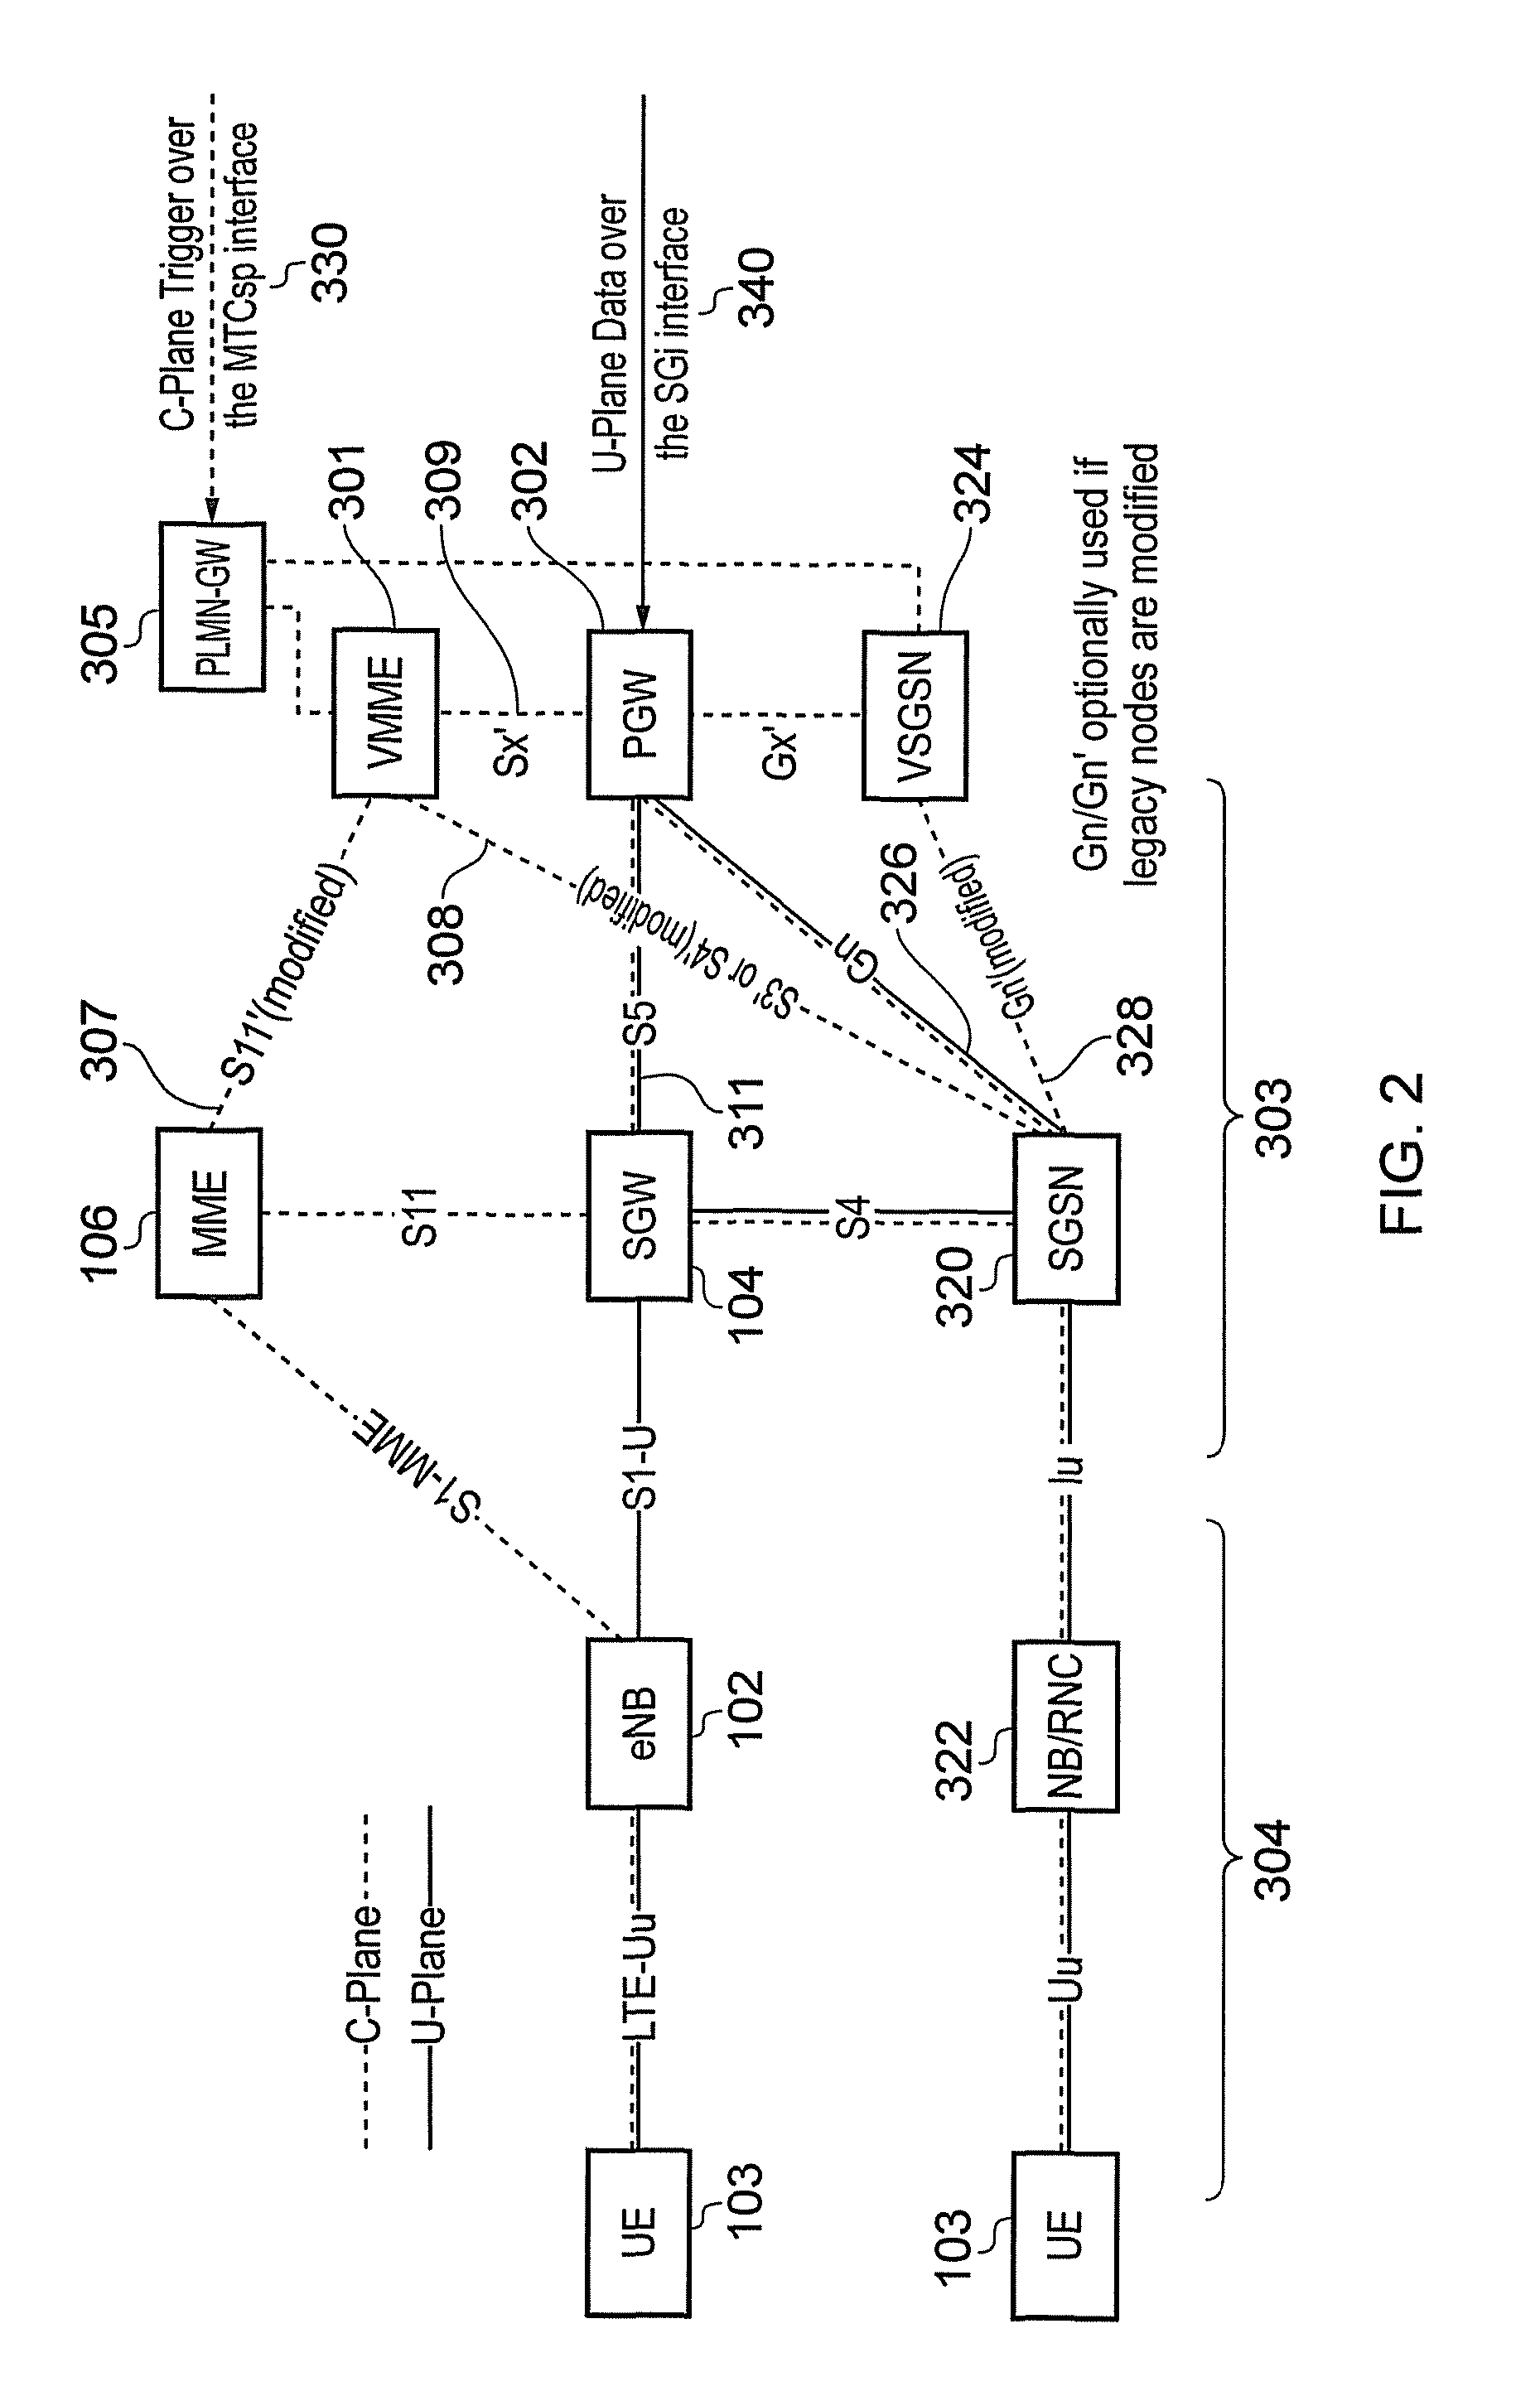 System and method for paging off-line state terminals